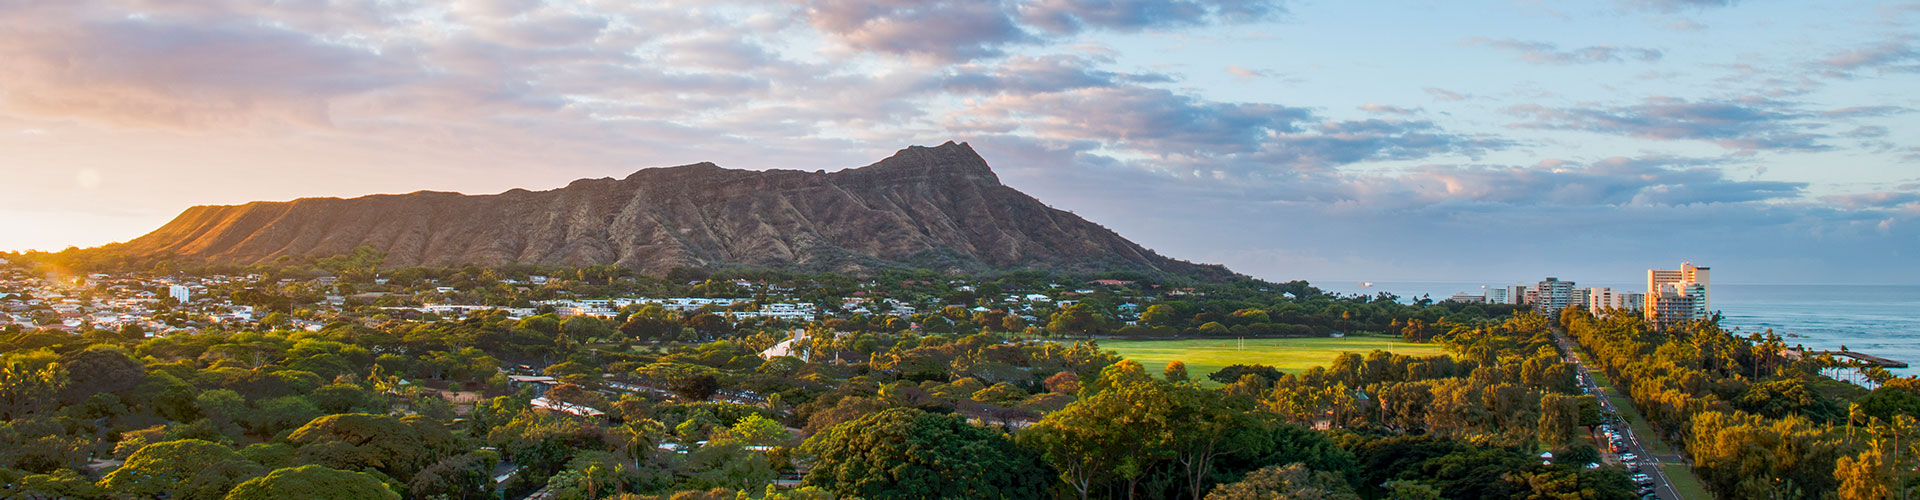 Diamond Head with houses at the bottom